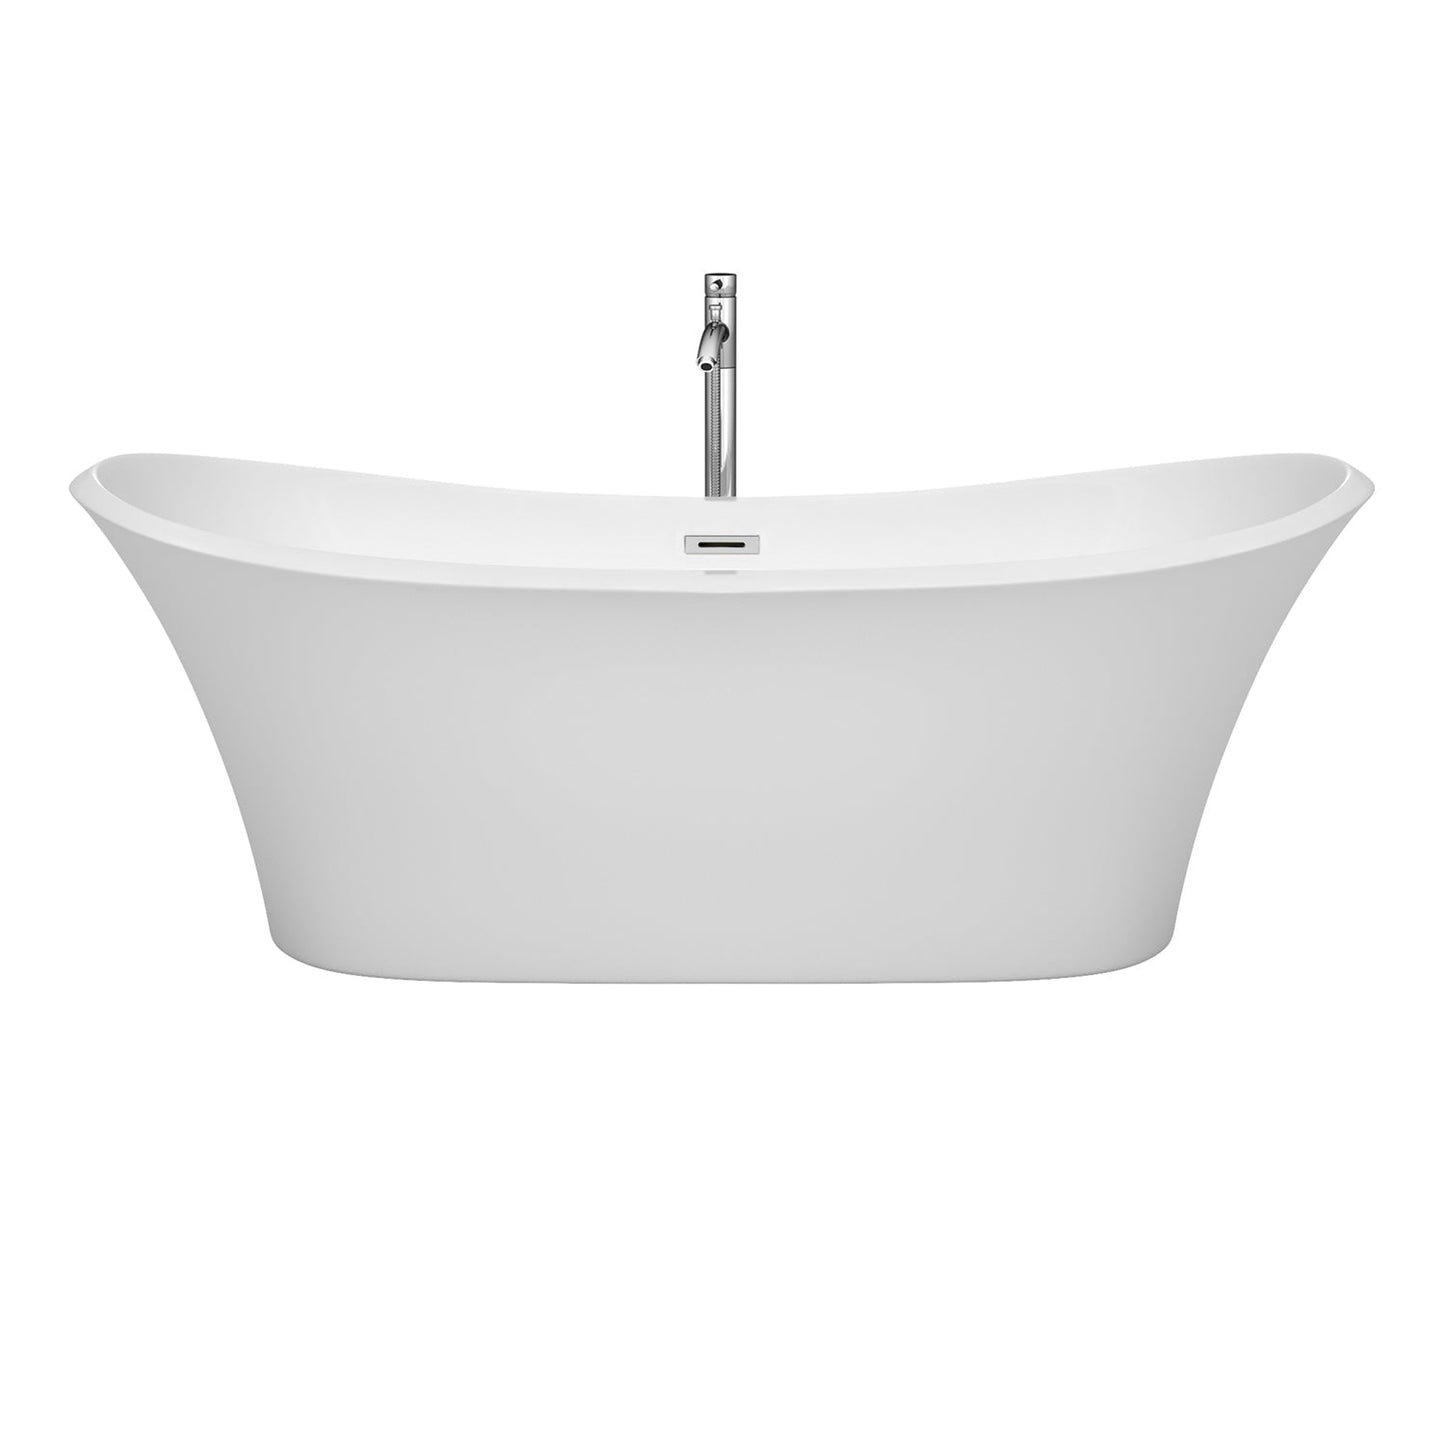 Wyndham Collection Bolera 71" Freestanding Bathtub in White With Floor Mounted Faucet, Drain and Overflow Trim in Polished Chrome